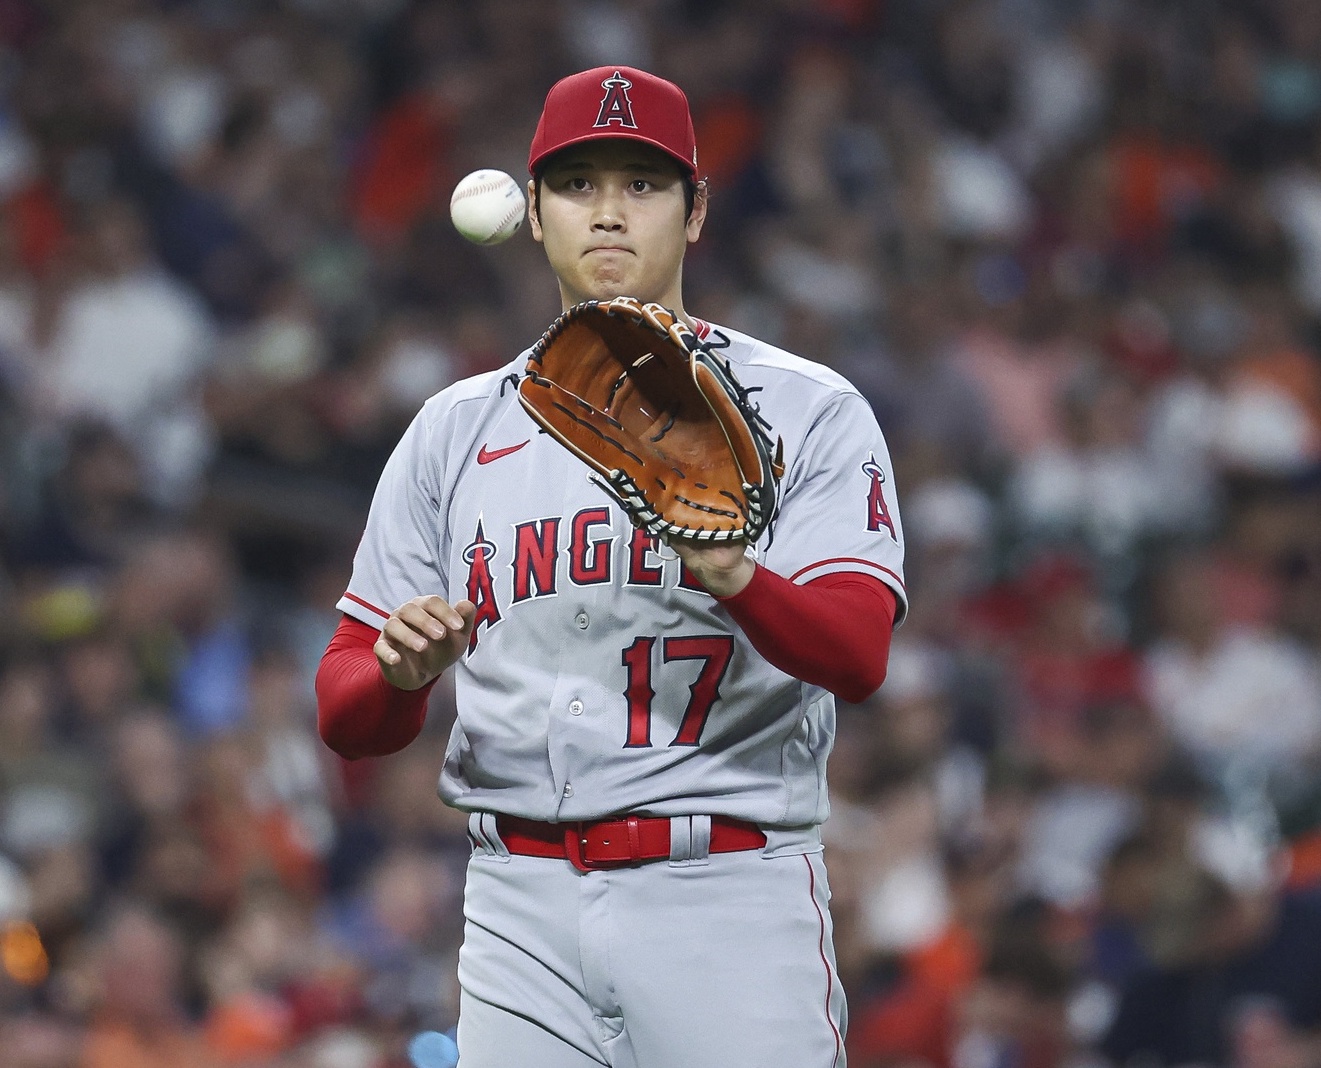 Angels Giving Shohei Ohtani Extra Rest Before Next Start Against Mariners